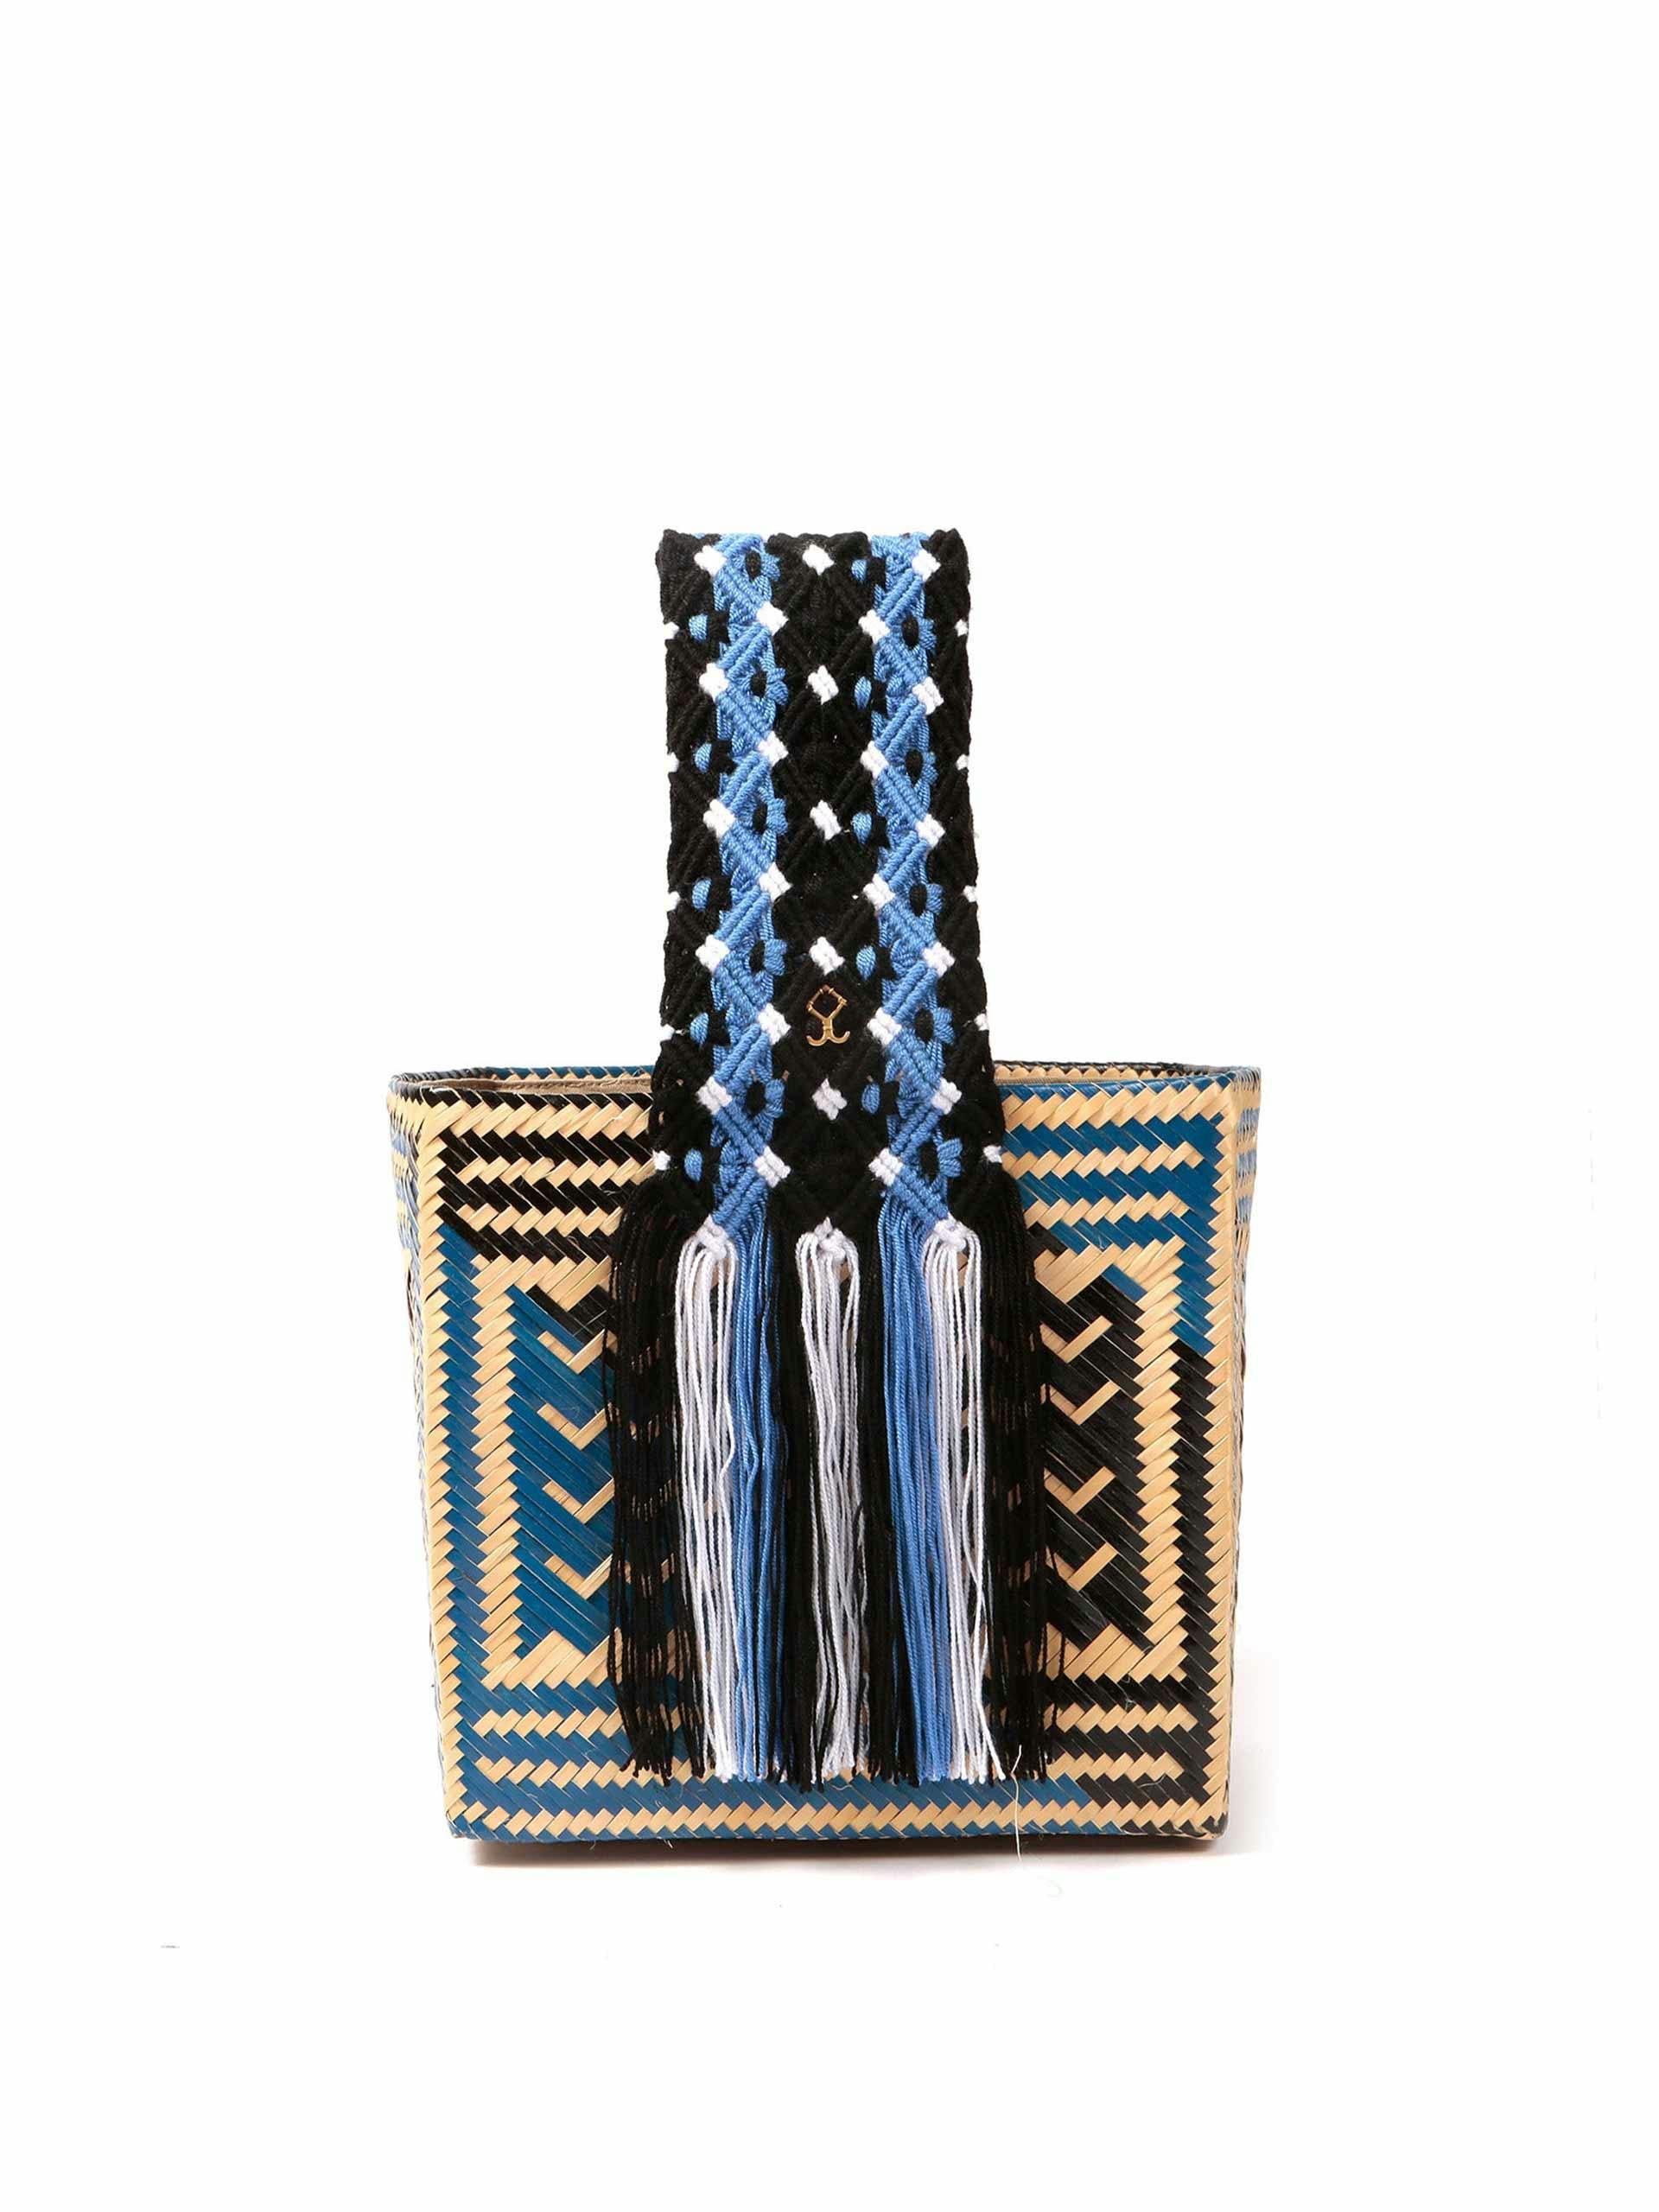 Black and blue woven straw bag